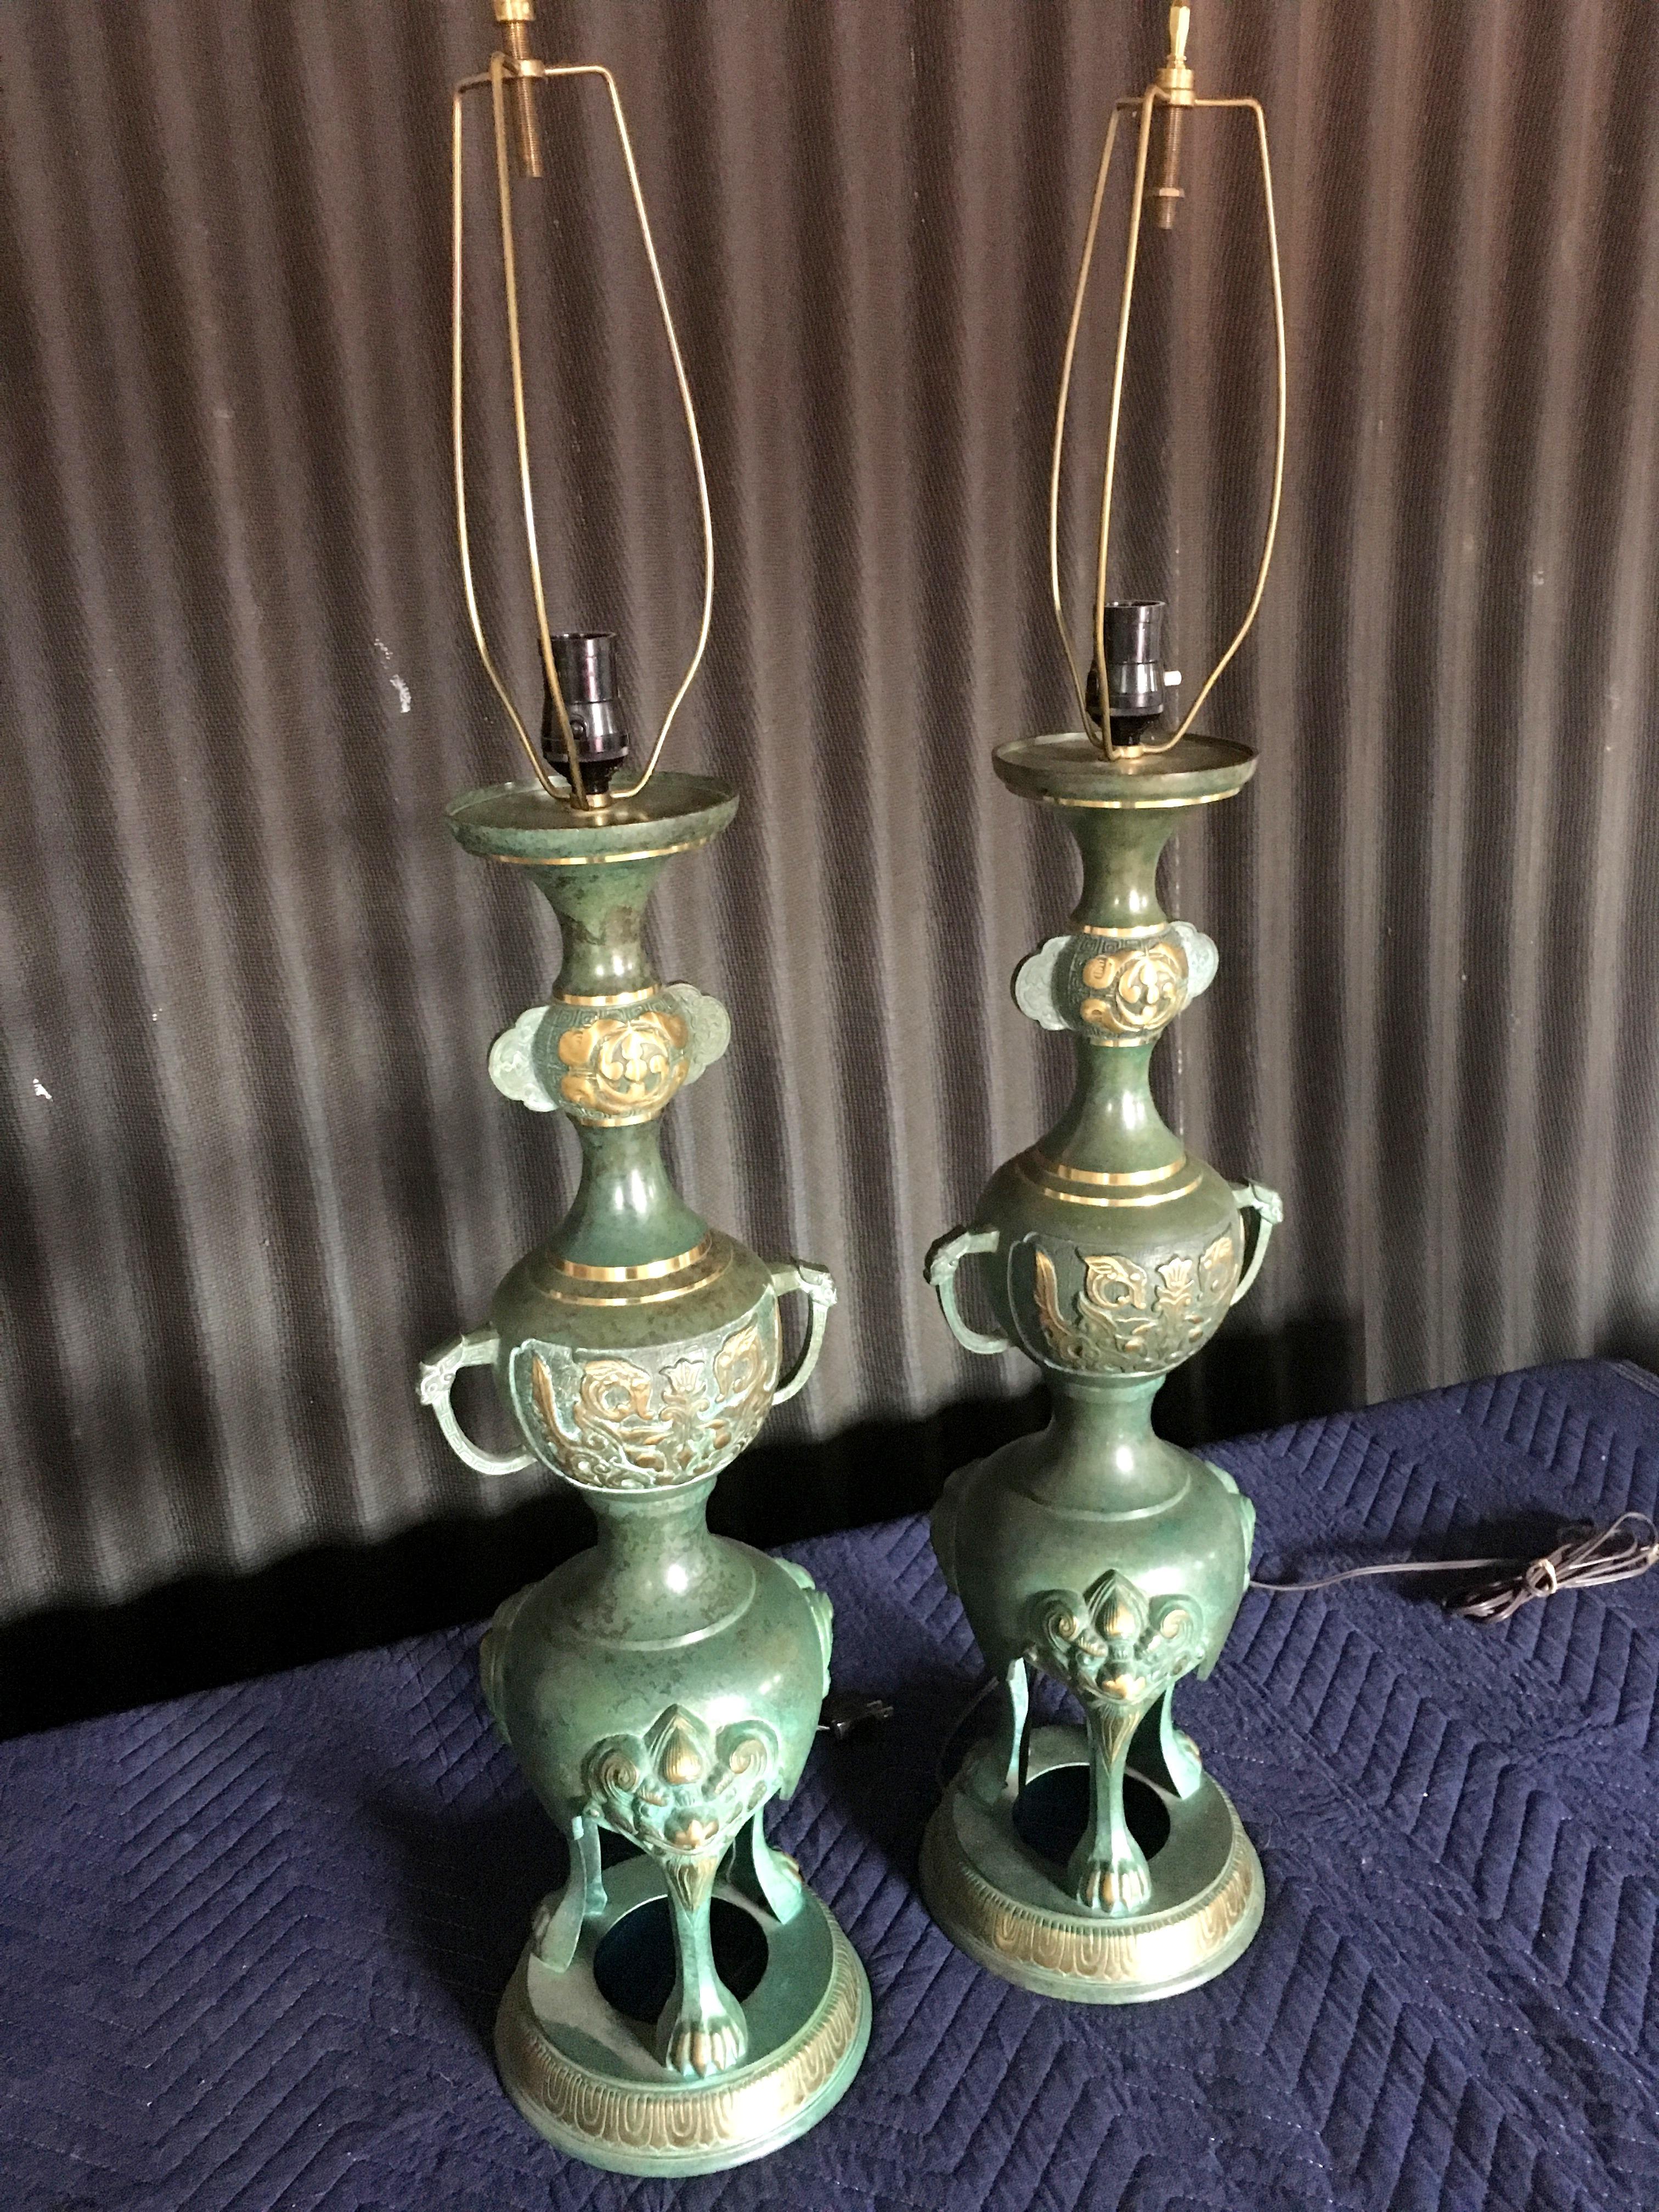 In the style of James Mont, these amazing lamps are just perfect!
Bronze lamps trimmed in brass. Simply gorgeous!
Lamps are in excellent condition with no visible signs of wear.
Wiring is perfect and the lamps are ready to use right